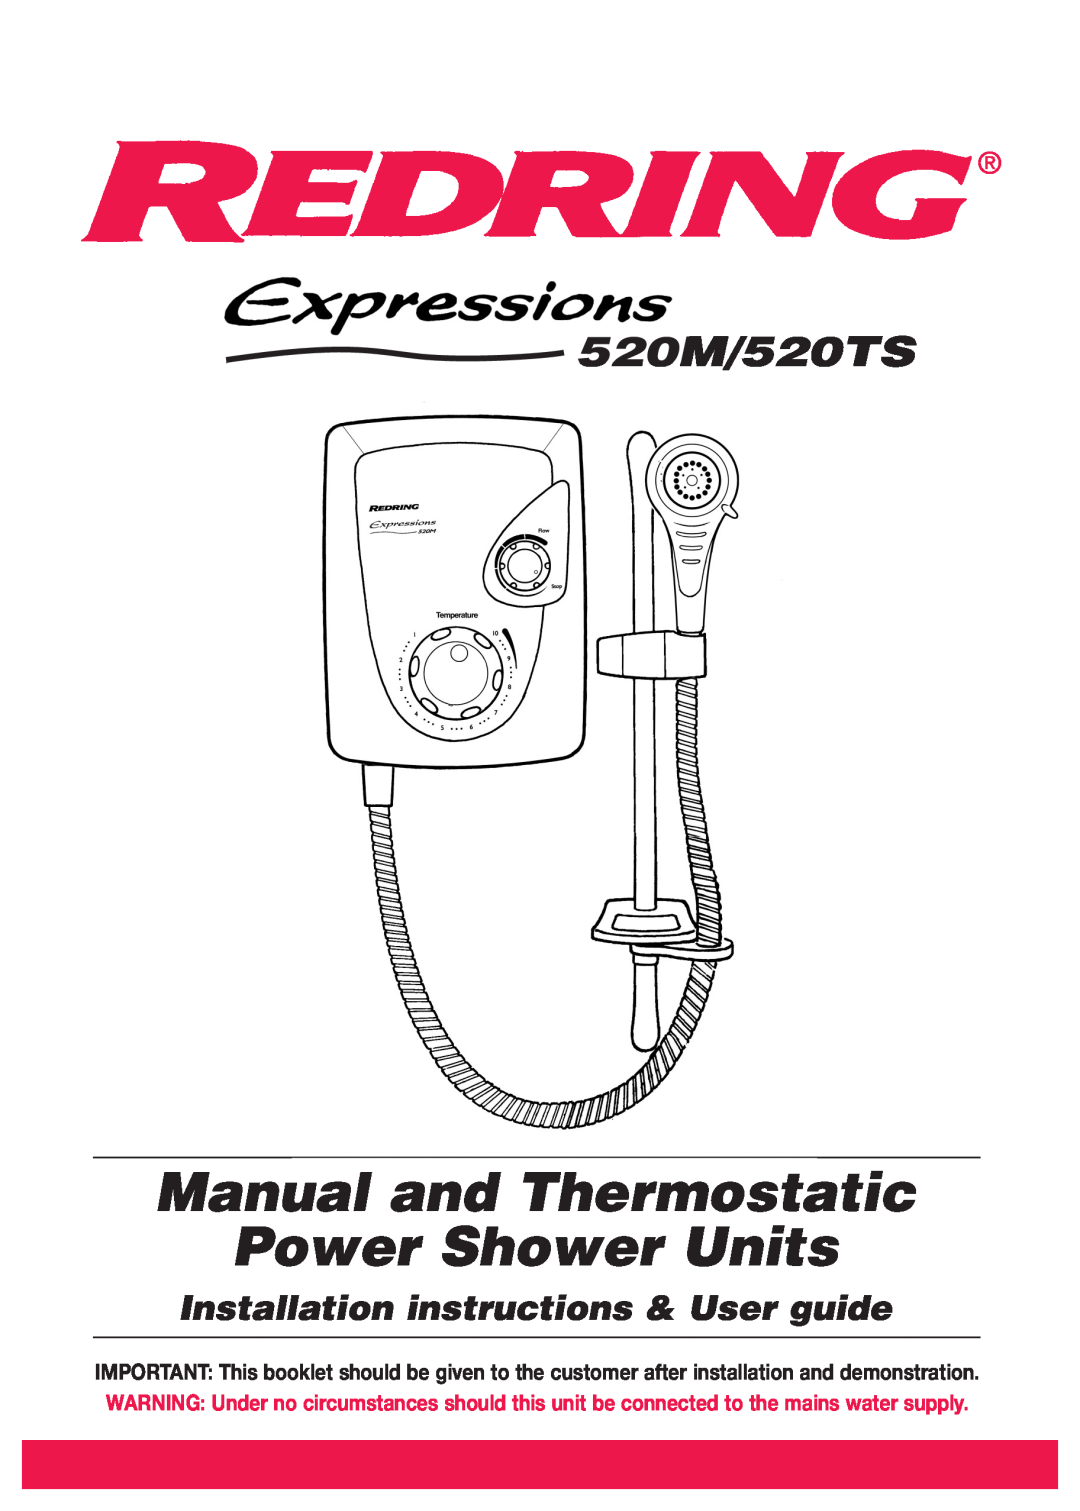 Redring installation instructions Manual and Thermostatic Power Shower Units, 520M/520TS 